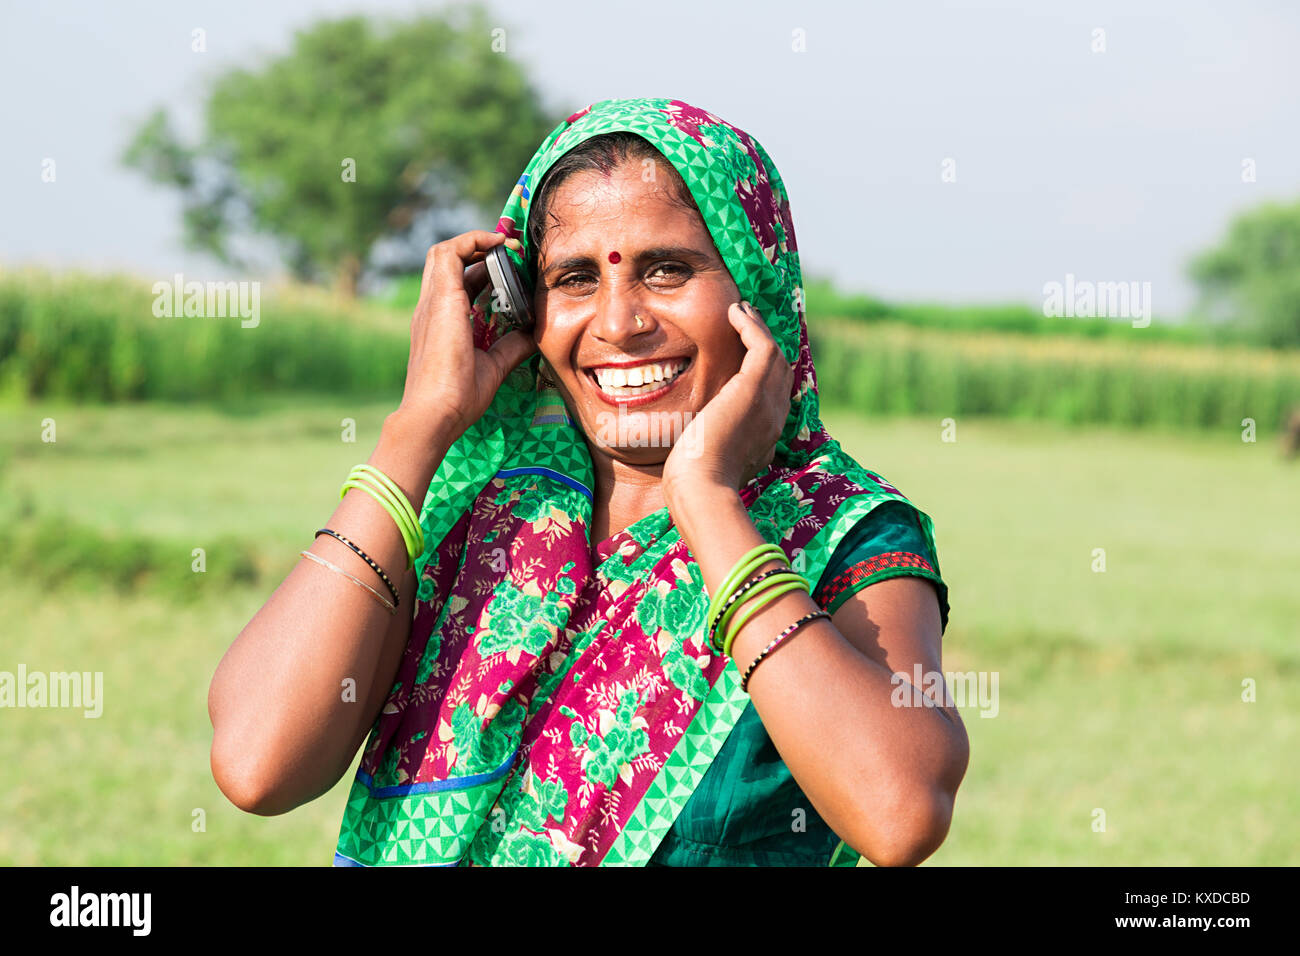 Smiling 1 Indian Rural Woman Housewife Talking On Mobile Phone Stock Photo